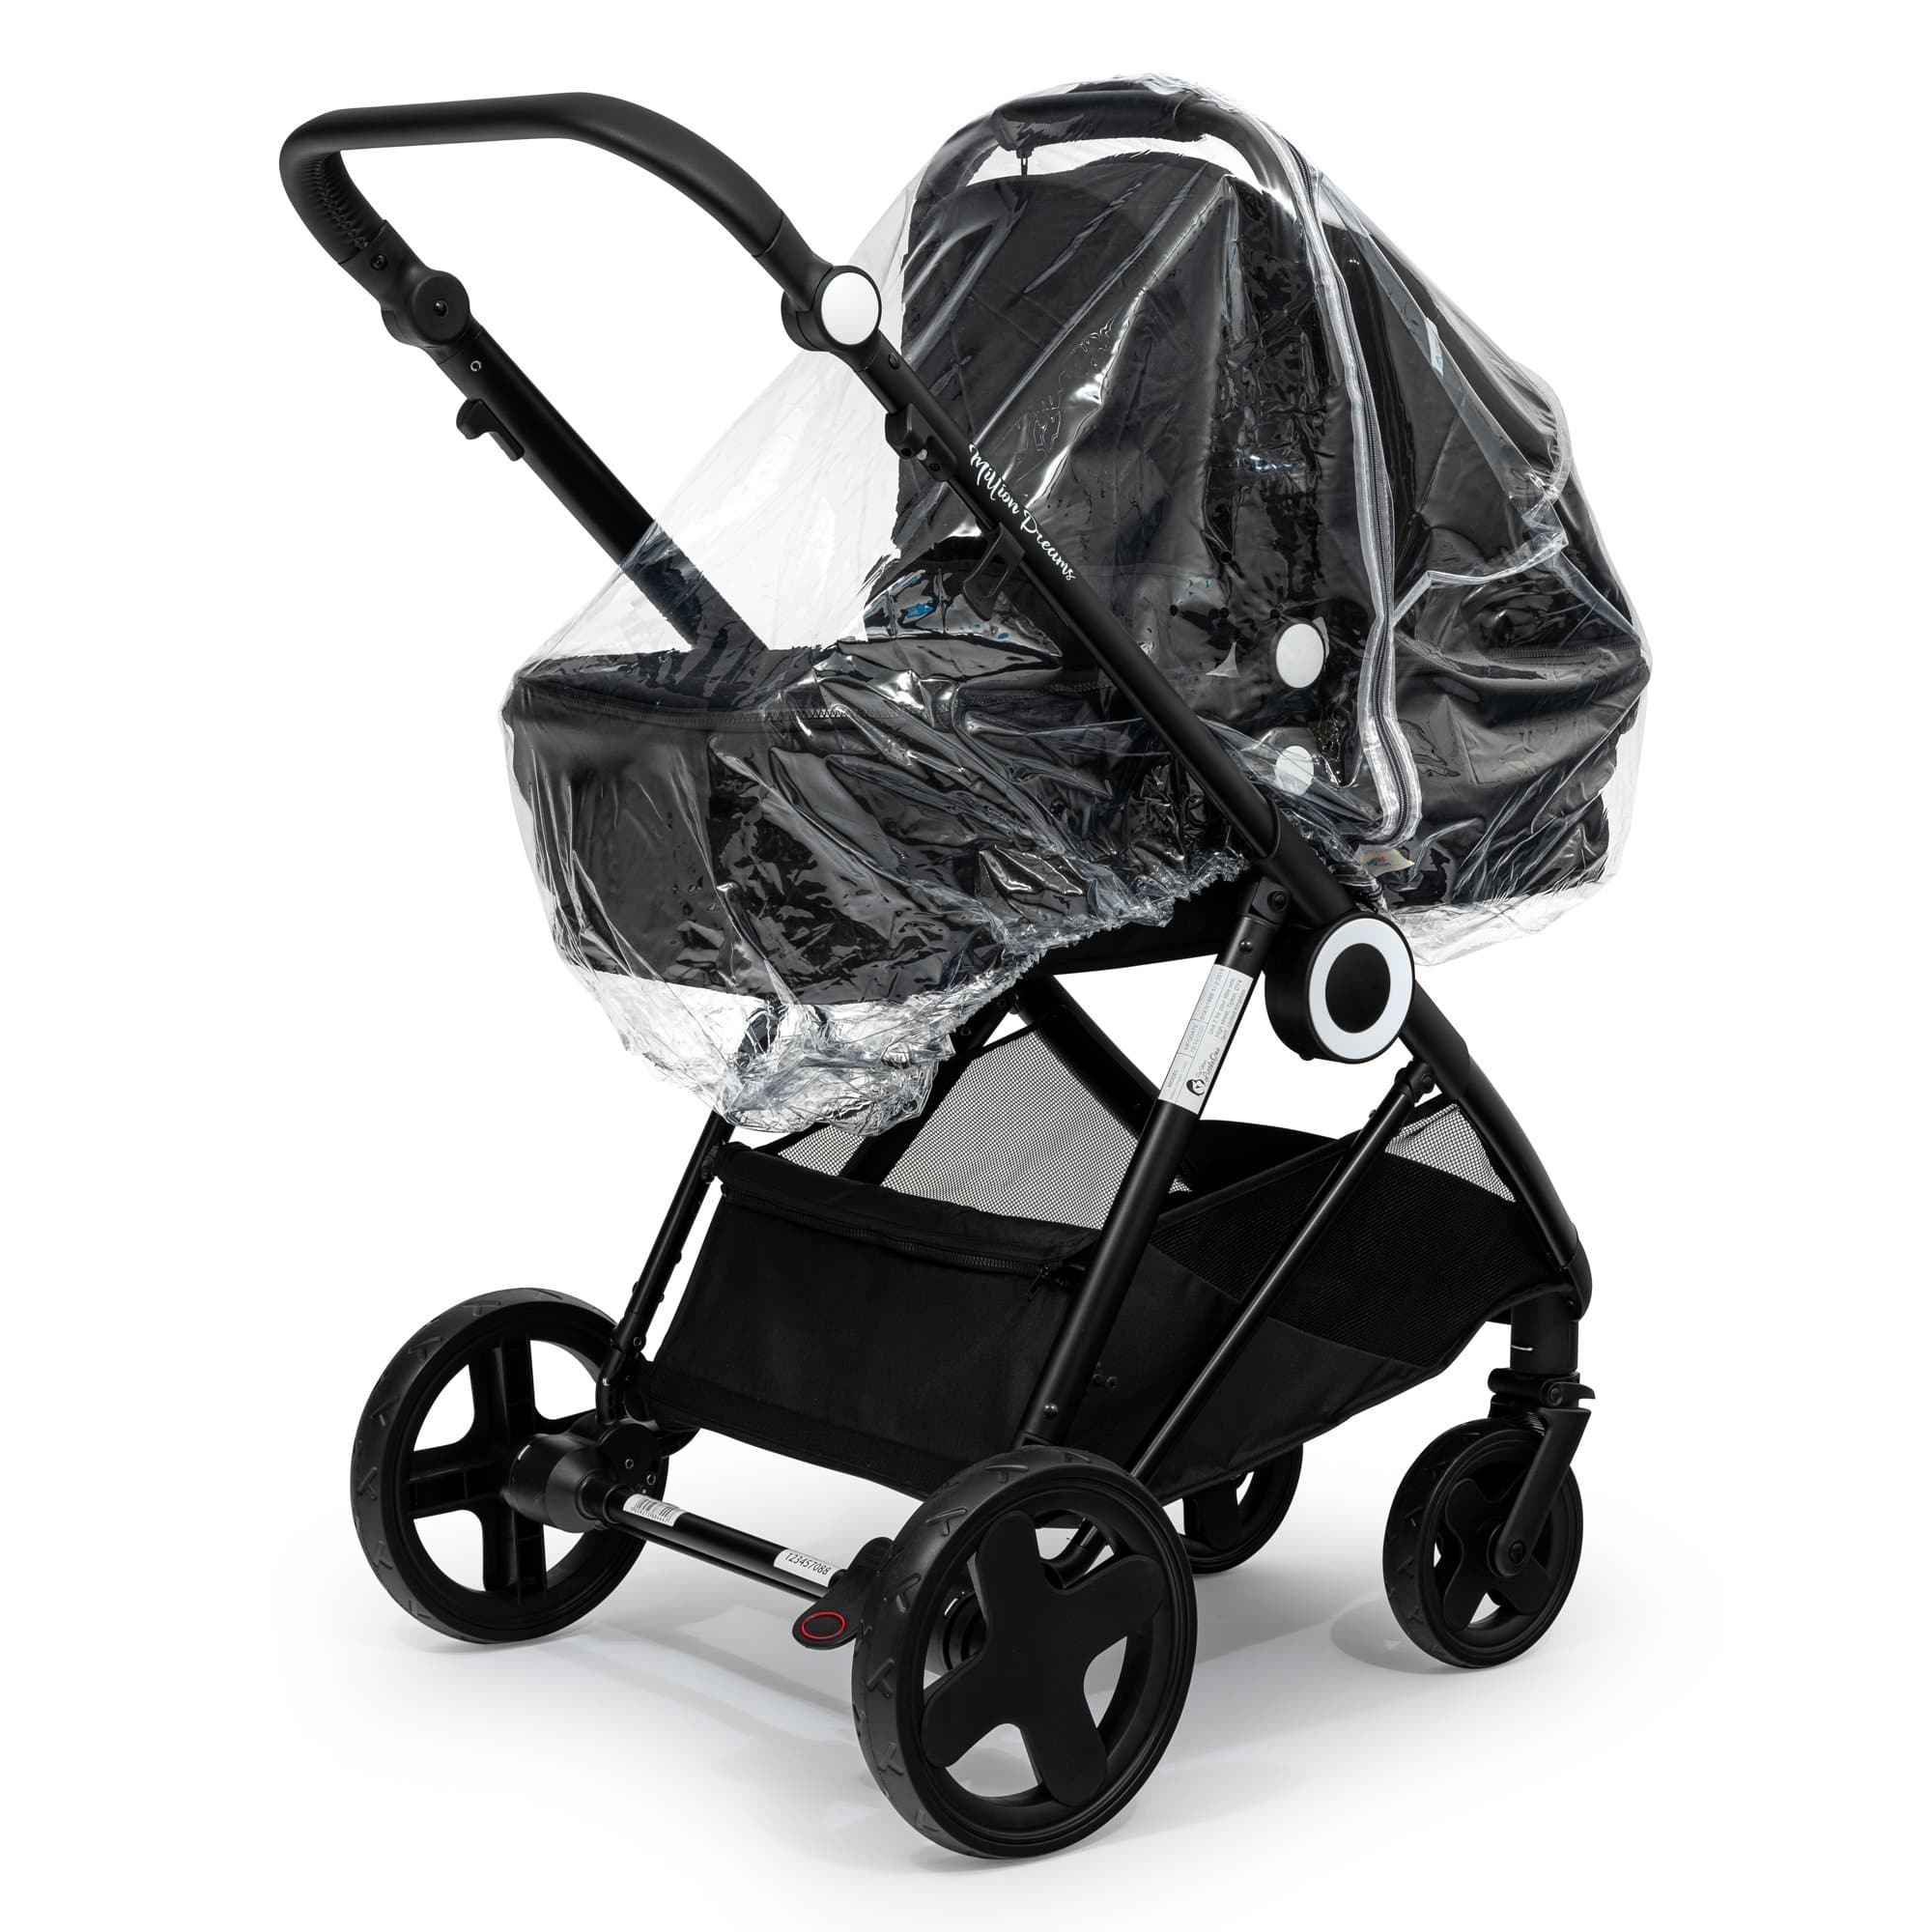 2 in 1 Rain Cover Compatible with Teutonia - Fits All Models - For Your Little One